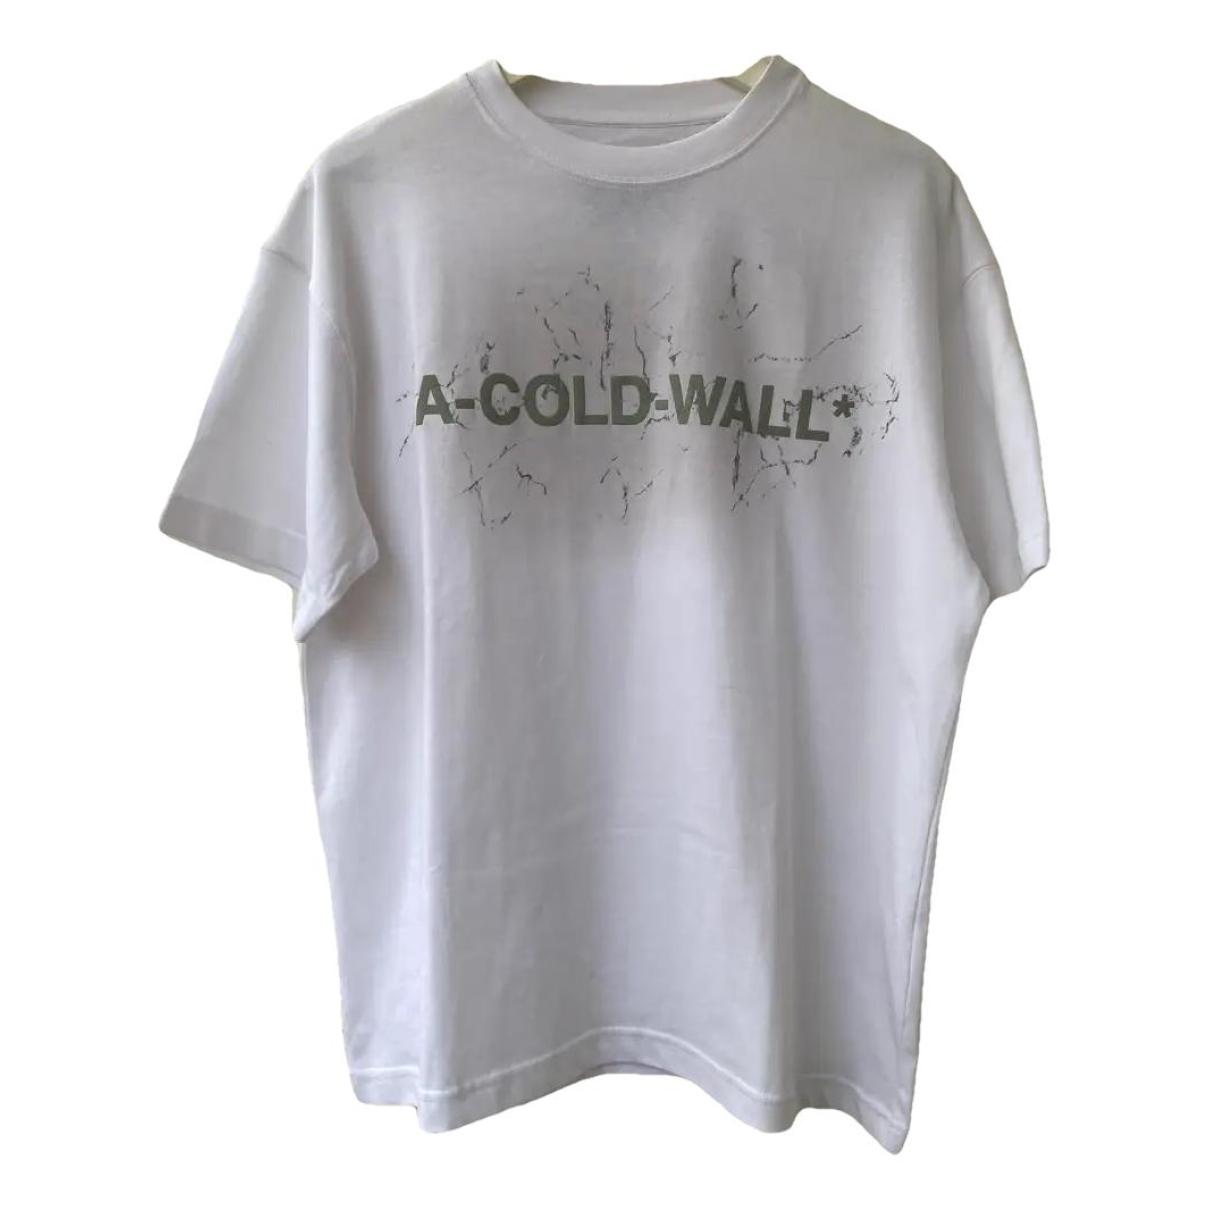 T-shirt A-Cold-Wall White size S International in Cotton - 34378276